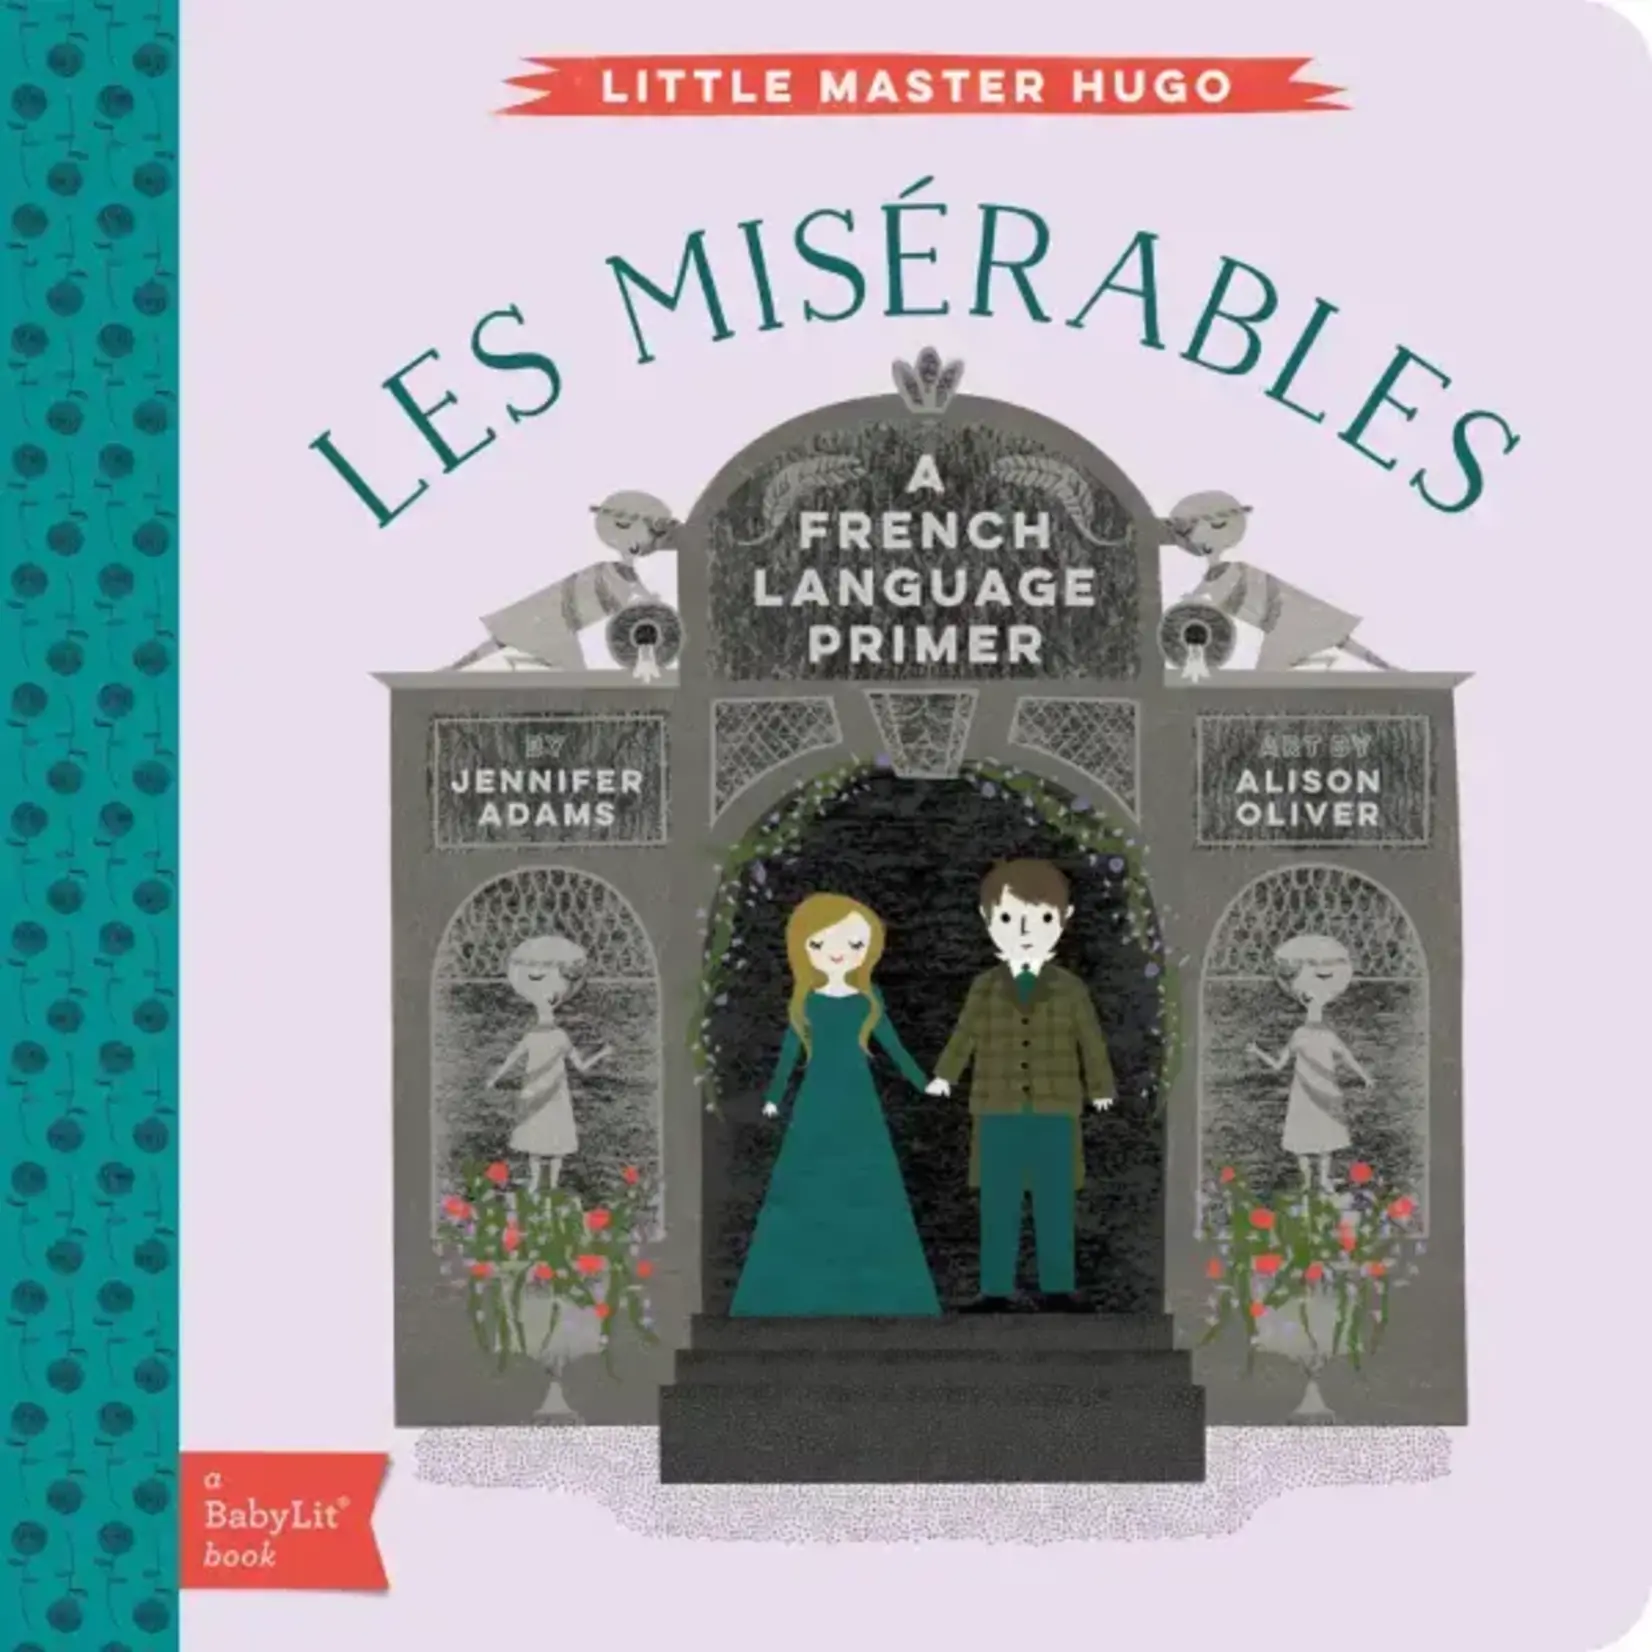 Baby Lit Board Book Les Miserables